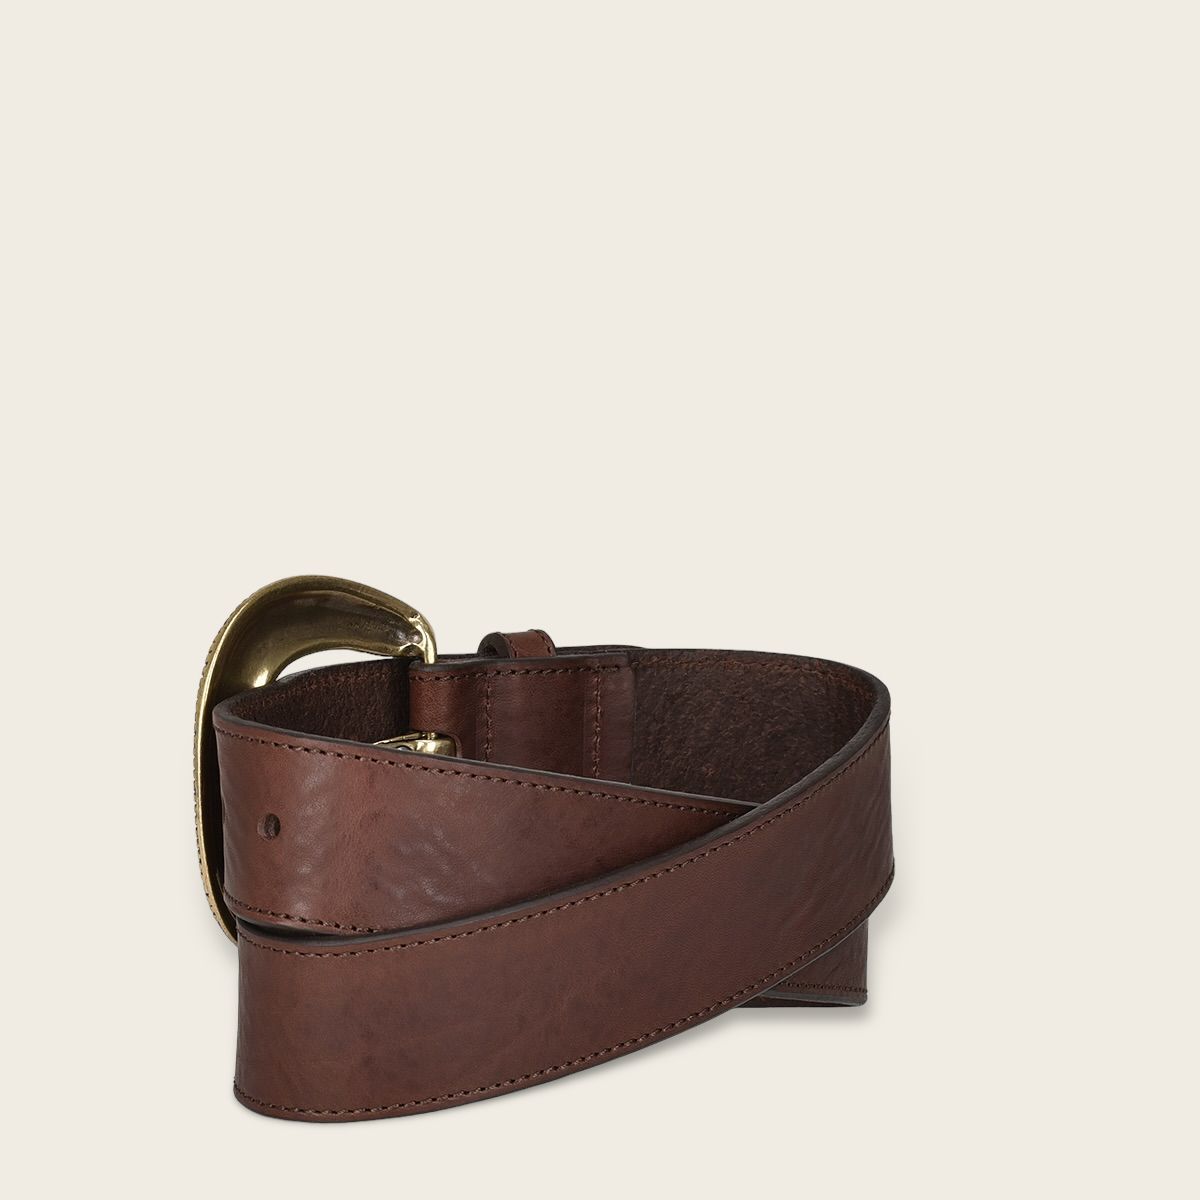 Brown leather western style belt